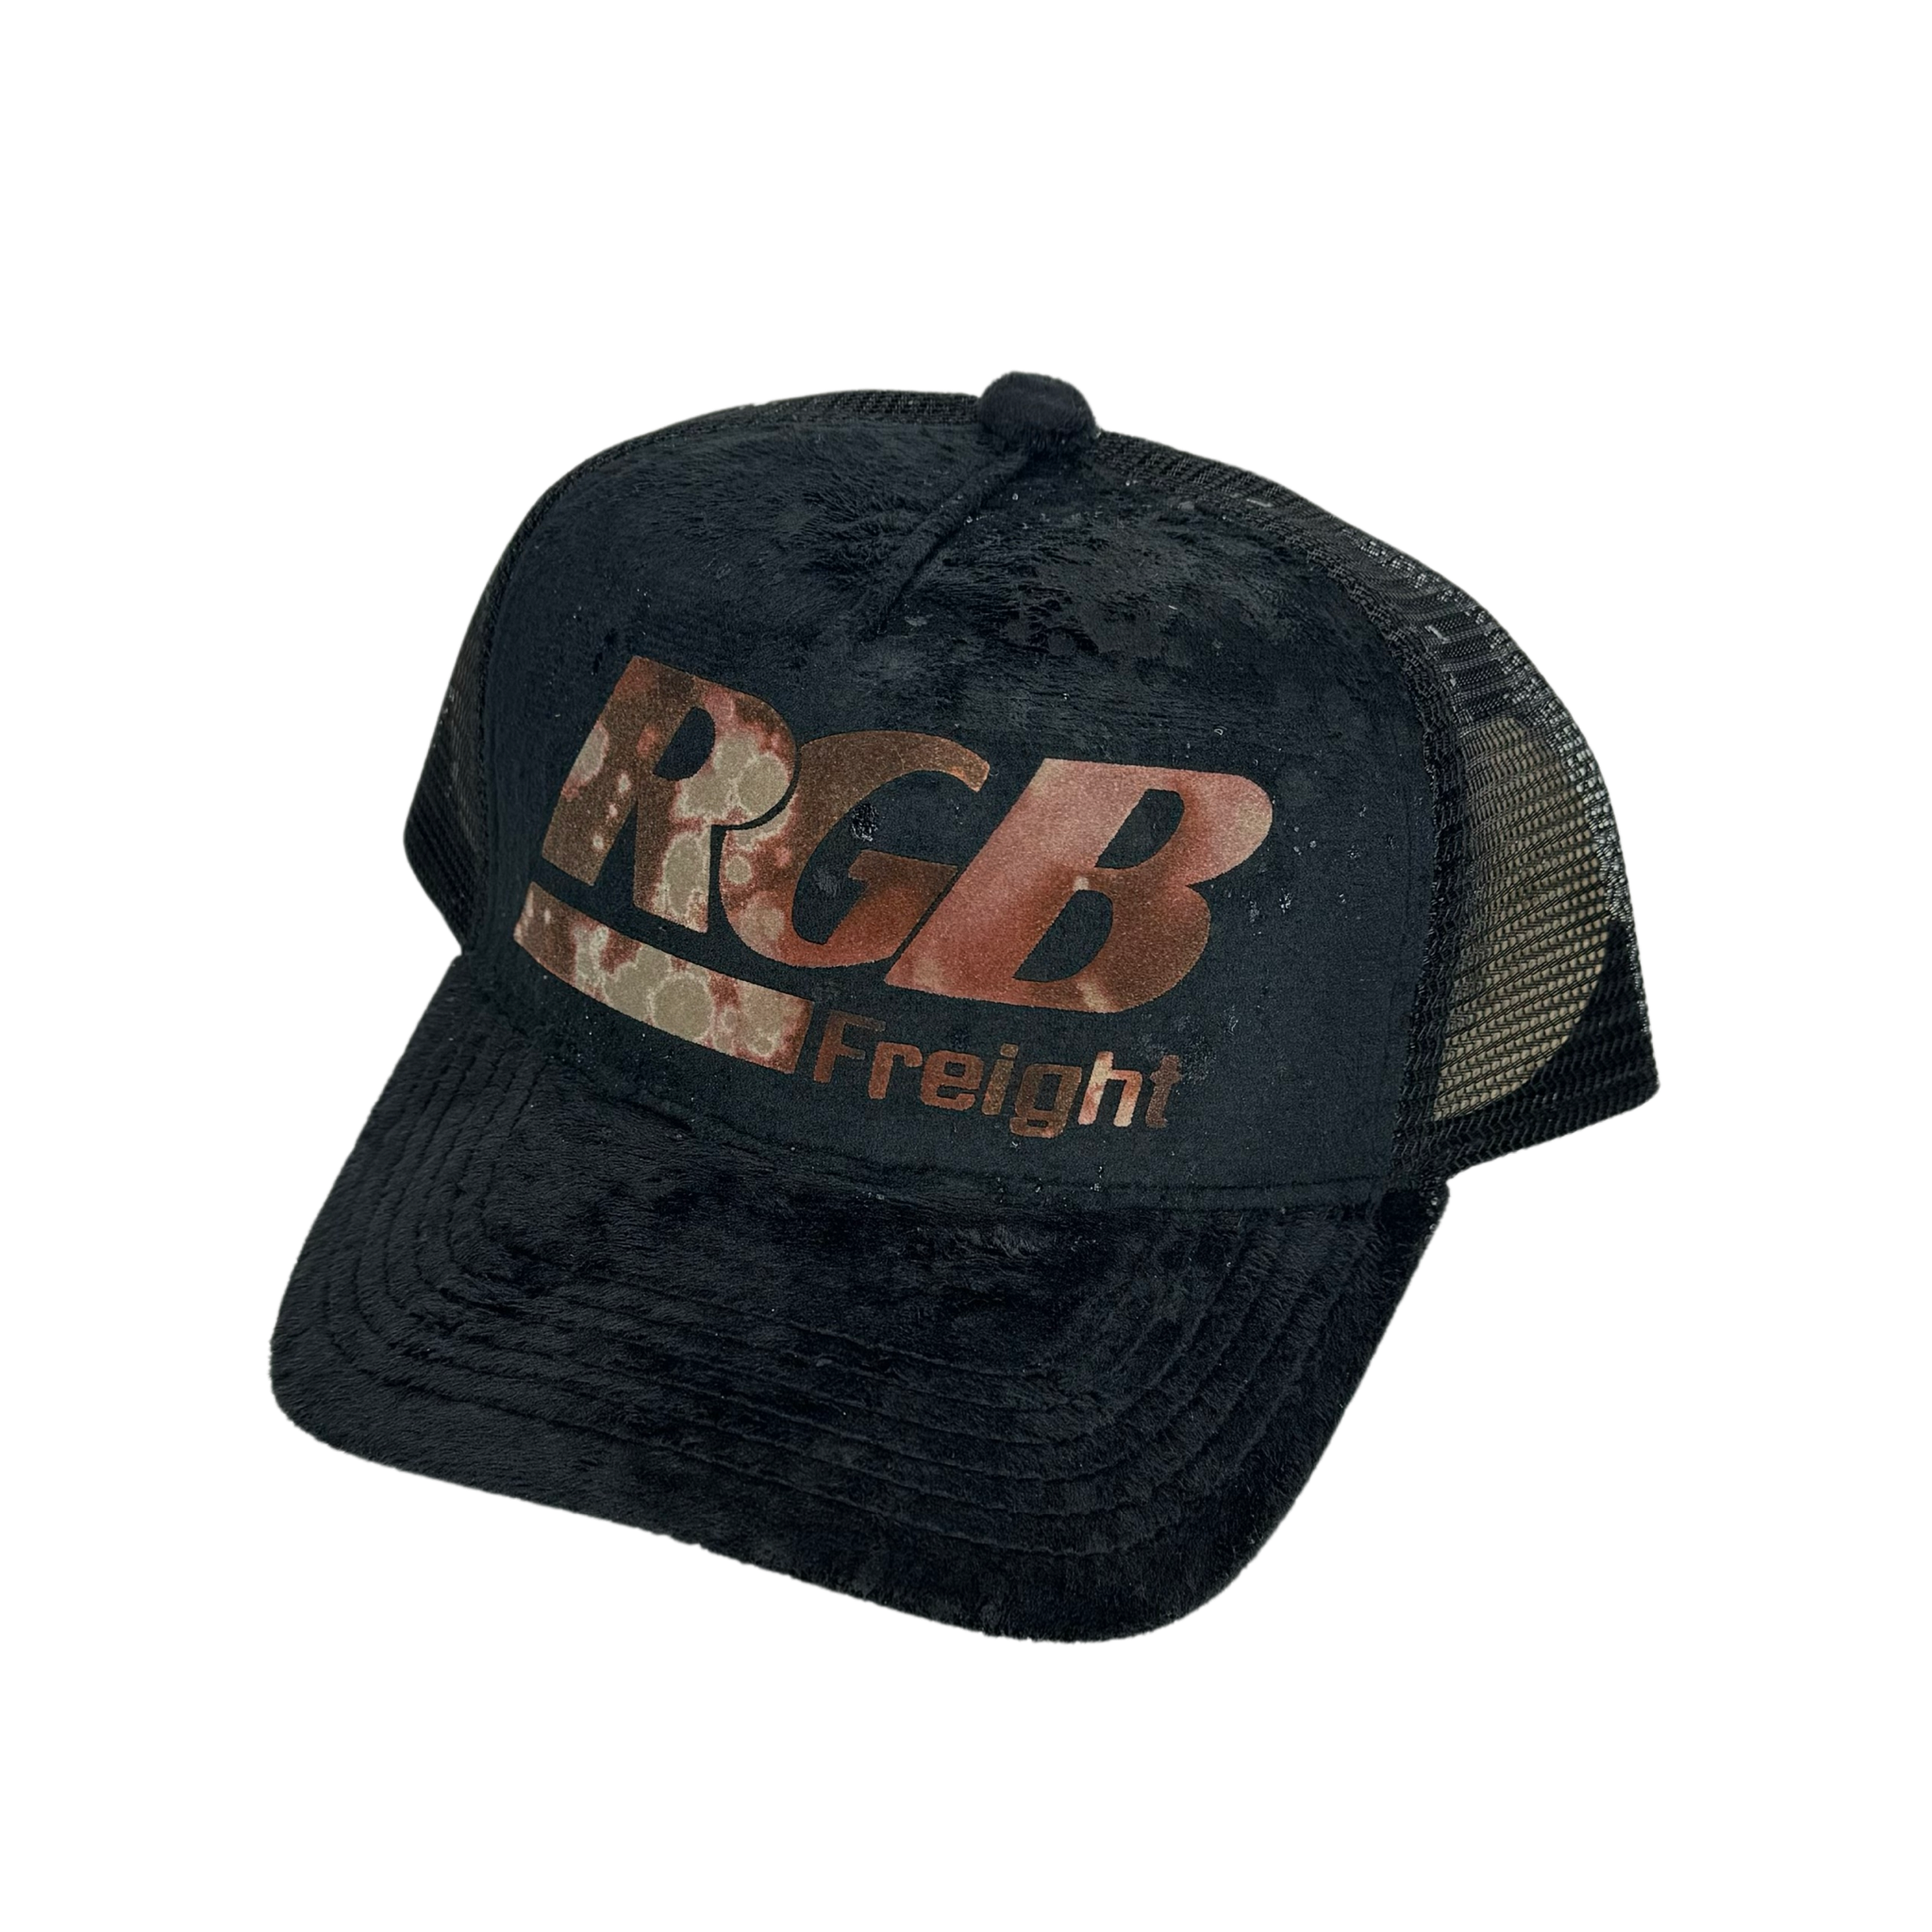 RGB FREIGHT TRUCKER HAT -  1 of 1 BLEACHED